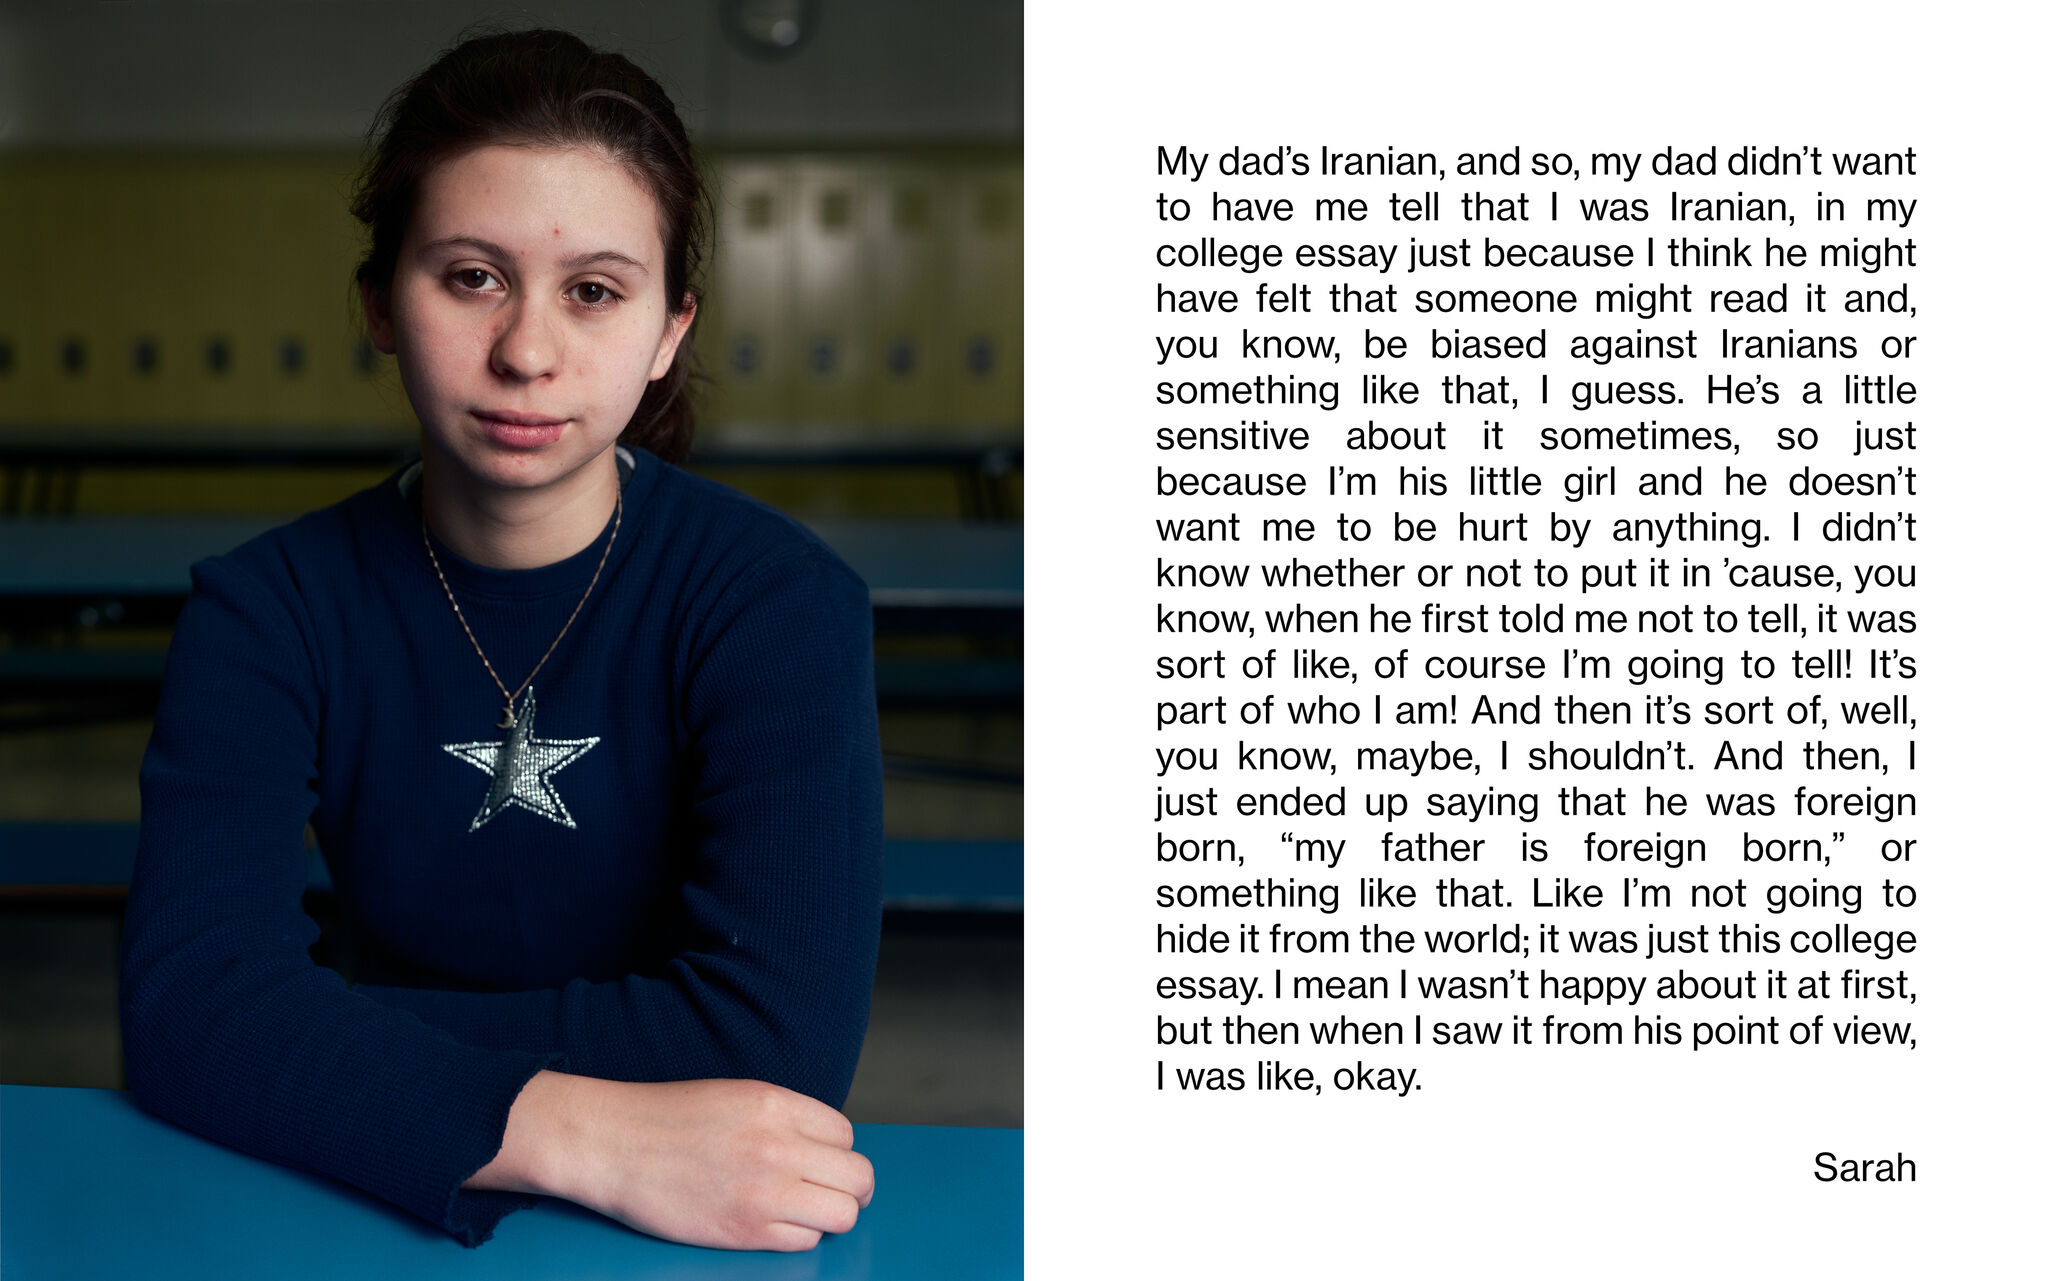 A portrait of a student sitting in front of a row of lockers and facing the camera. "My dad's Iranian, and so, my dad didn't want to have me tell that I was Iranian, in my college essay just because I think he might have felt that someone might read it and, you know, be biased against Iranians or something like that, I guess. He's a little sensitive about it sometimes, so just because I'm his little girl and he doesn't want me to be hurt by anything. I didn't know whether or not to put it in 'cause, you know, when he first told me not to tell, it was sort of like, of course I'm going to tell! It's part of who I am! And then it's sort of, well, you know, maybe, I shouldn't. And then, I just ended up saying that he was foreign born, "my father is foreign born," or something like that. Like I'm not going to hide it from the world; it was just this college essay. I mean I wasn't happy about it at first, but then when I saw it from his point of view, I was like, okay. Sarah"